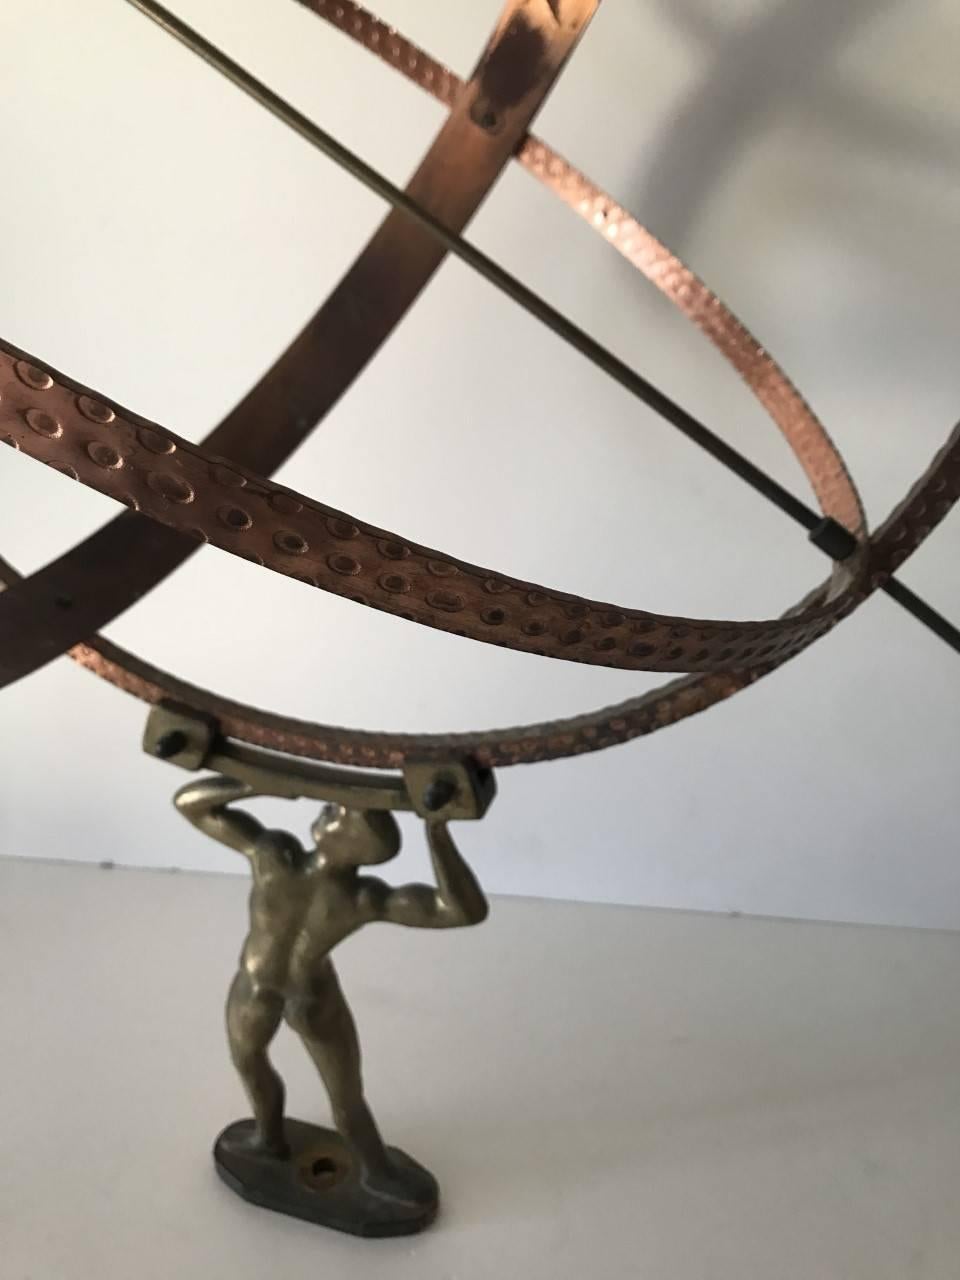 Very large Swedish copper and brass sundial 1960 with Hercules holding a sphere.
This is a very large sundial and for use in a garden, it has a metal base with drilled hole so that it can be fastened to a foundation, preferably a stone, rock or